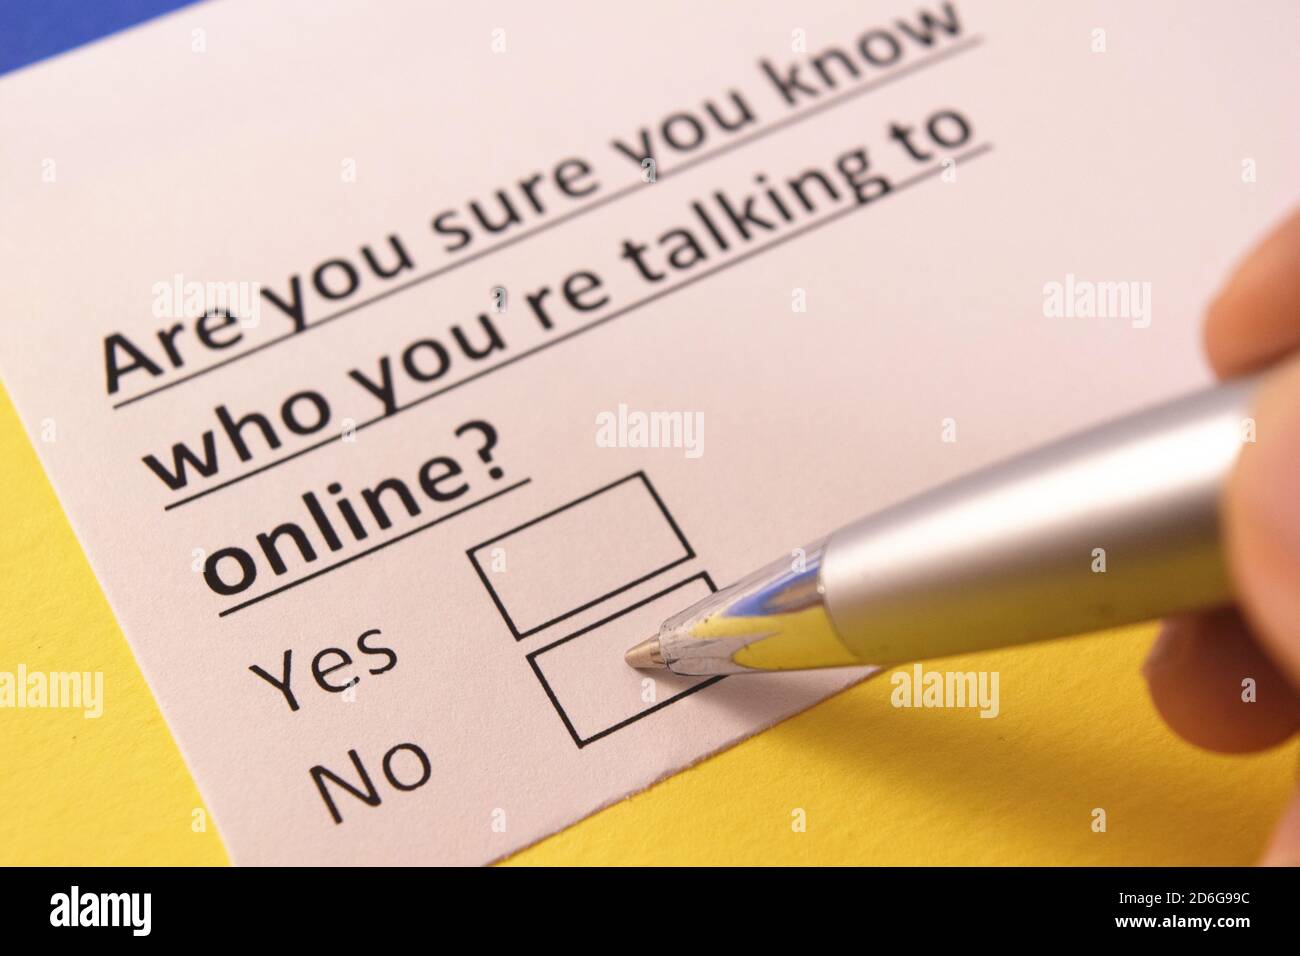 Are you sure you know who you're talking to online? Yes or no? Stock Photo